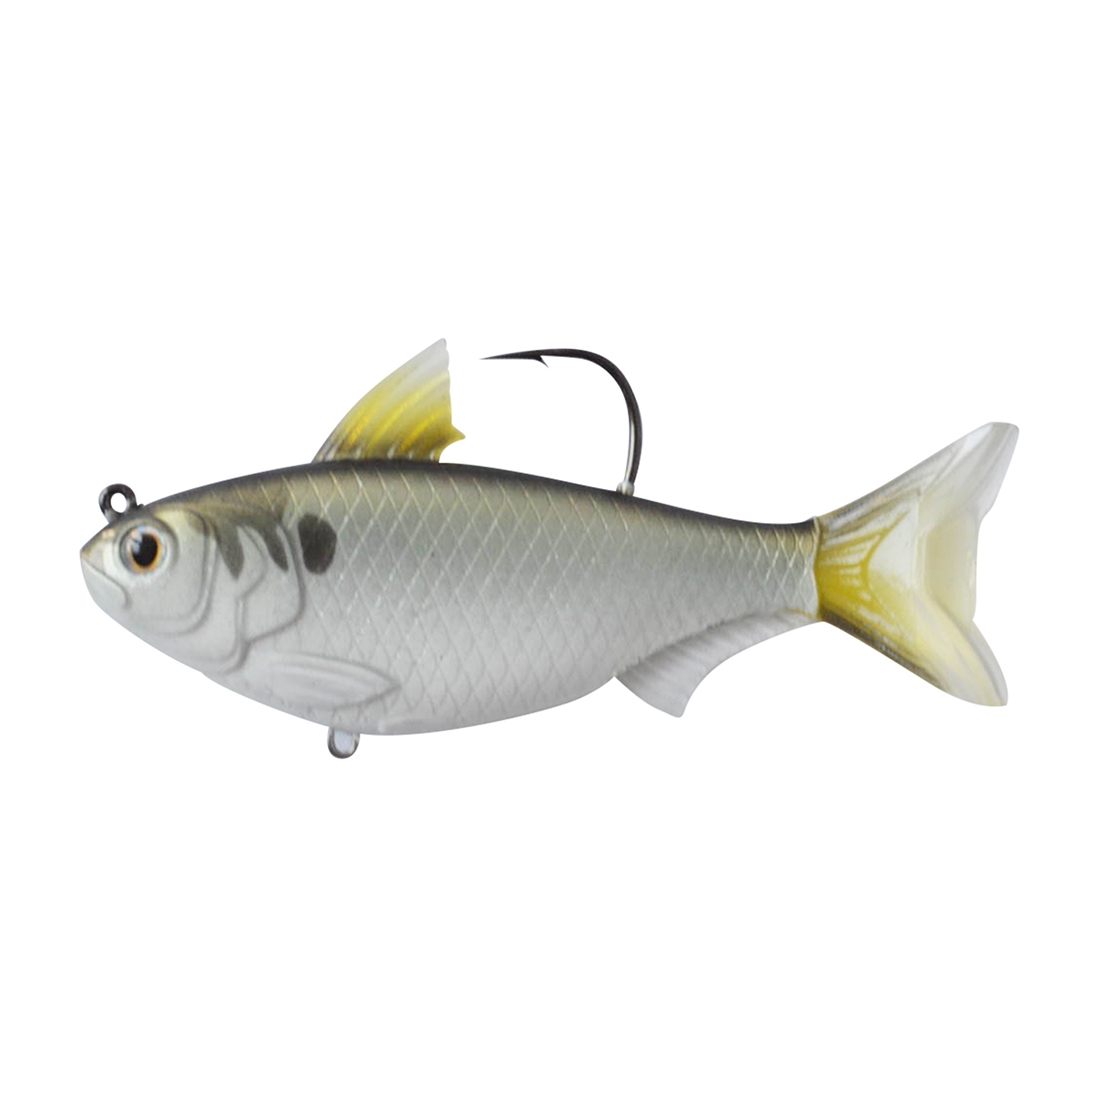 Baits Lures Flies Details About Livetarget Gizzard Shad Sliver Black 2 Koppers Gizzard Shad Gzc51m2 Sporting Goods